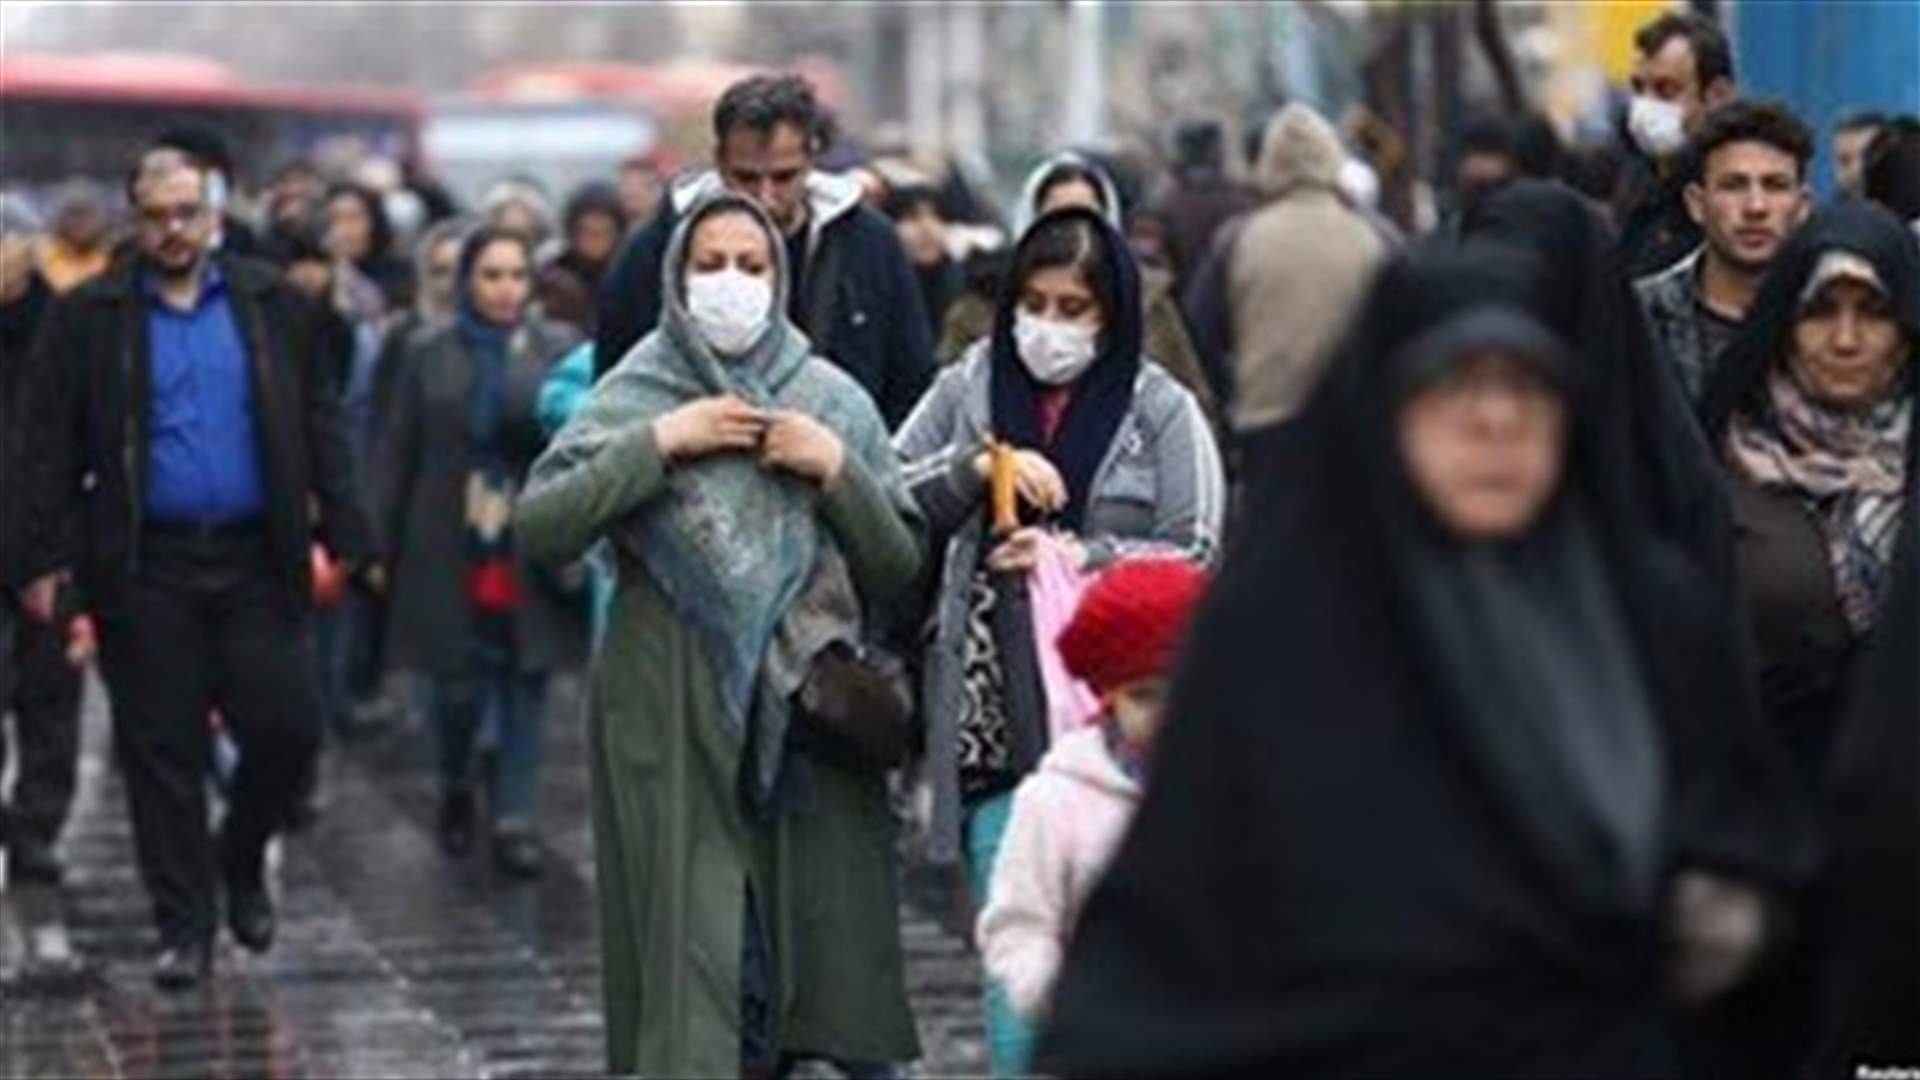 Iran&#39;s death toll from coronavirus climbs to 2,898 - health official